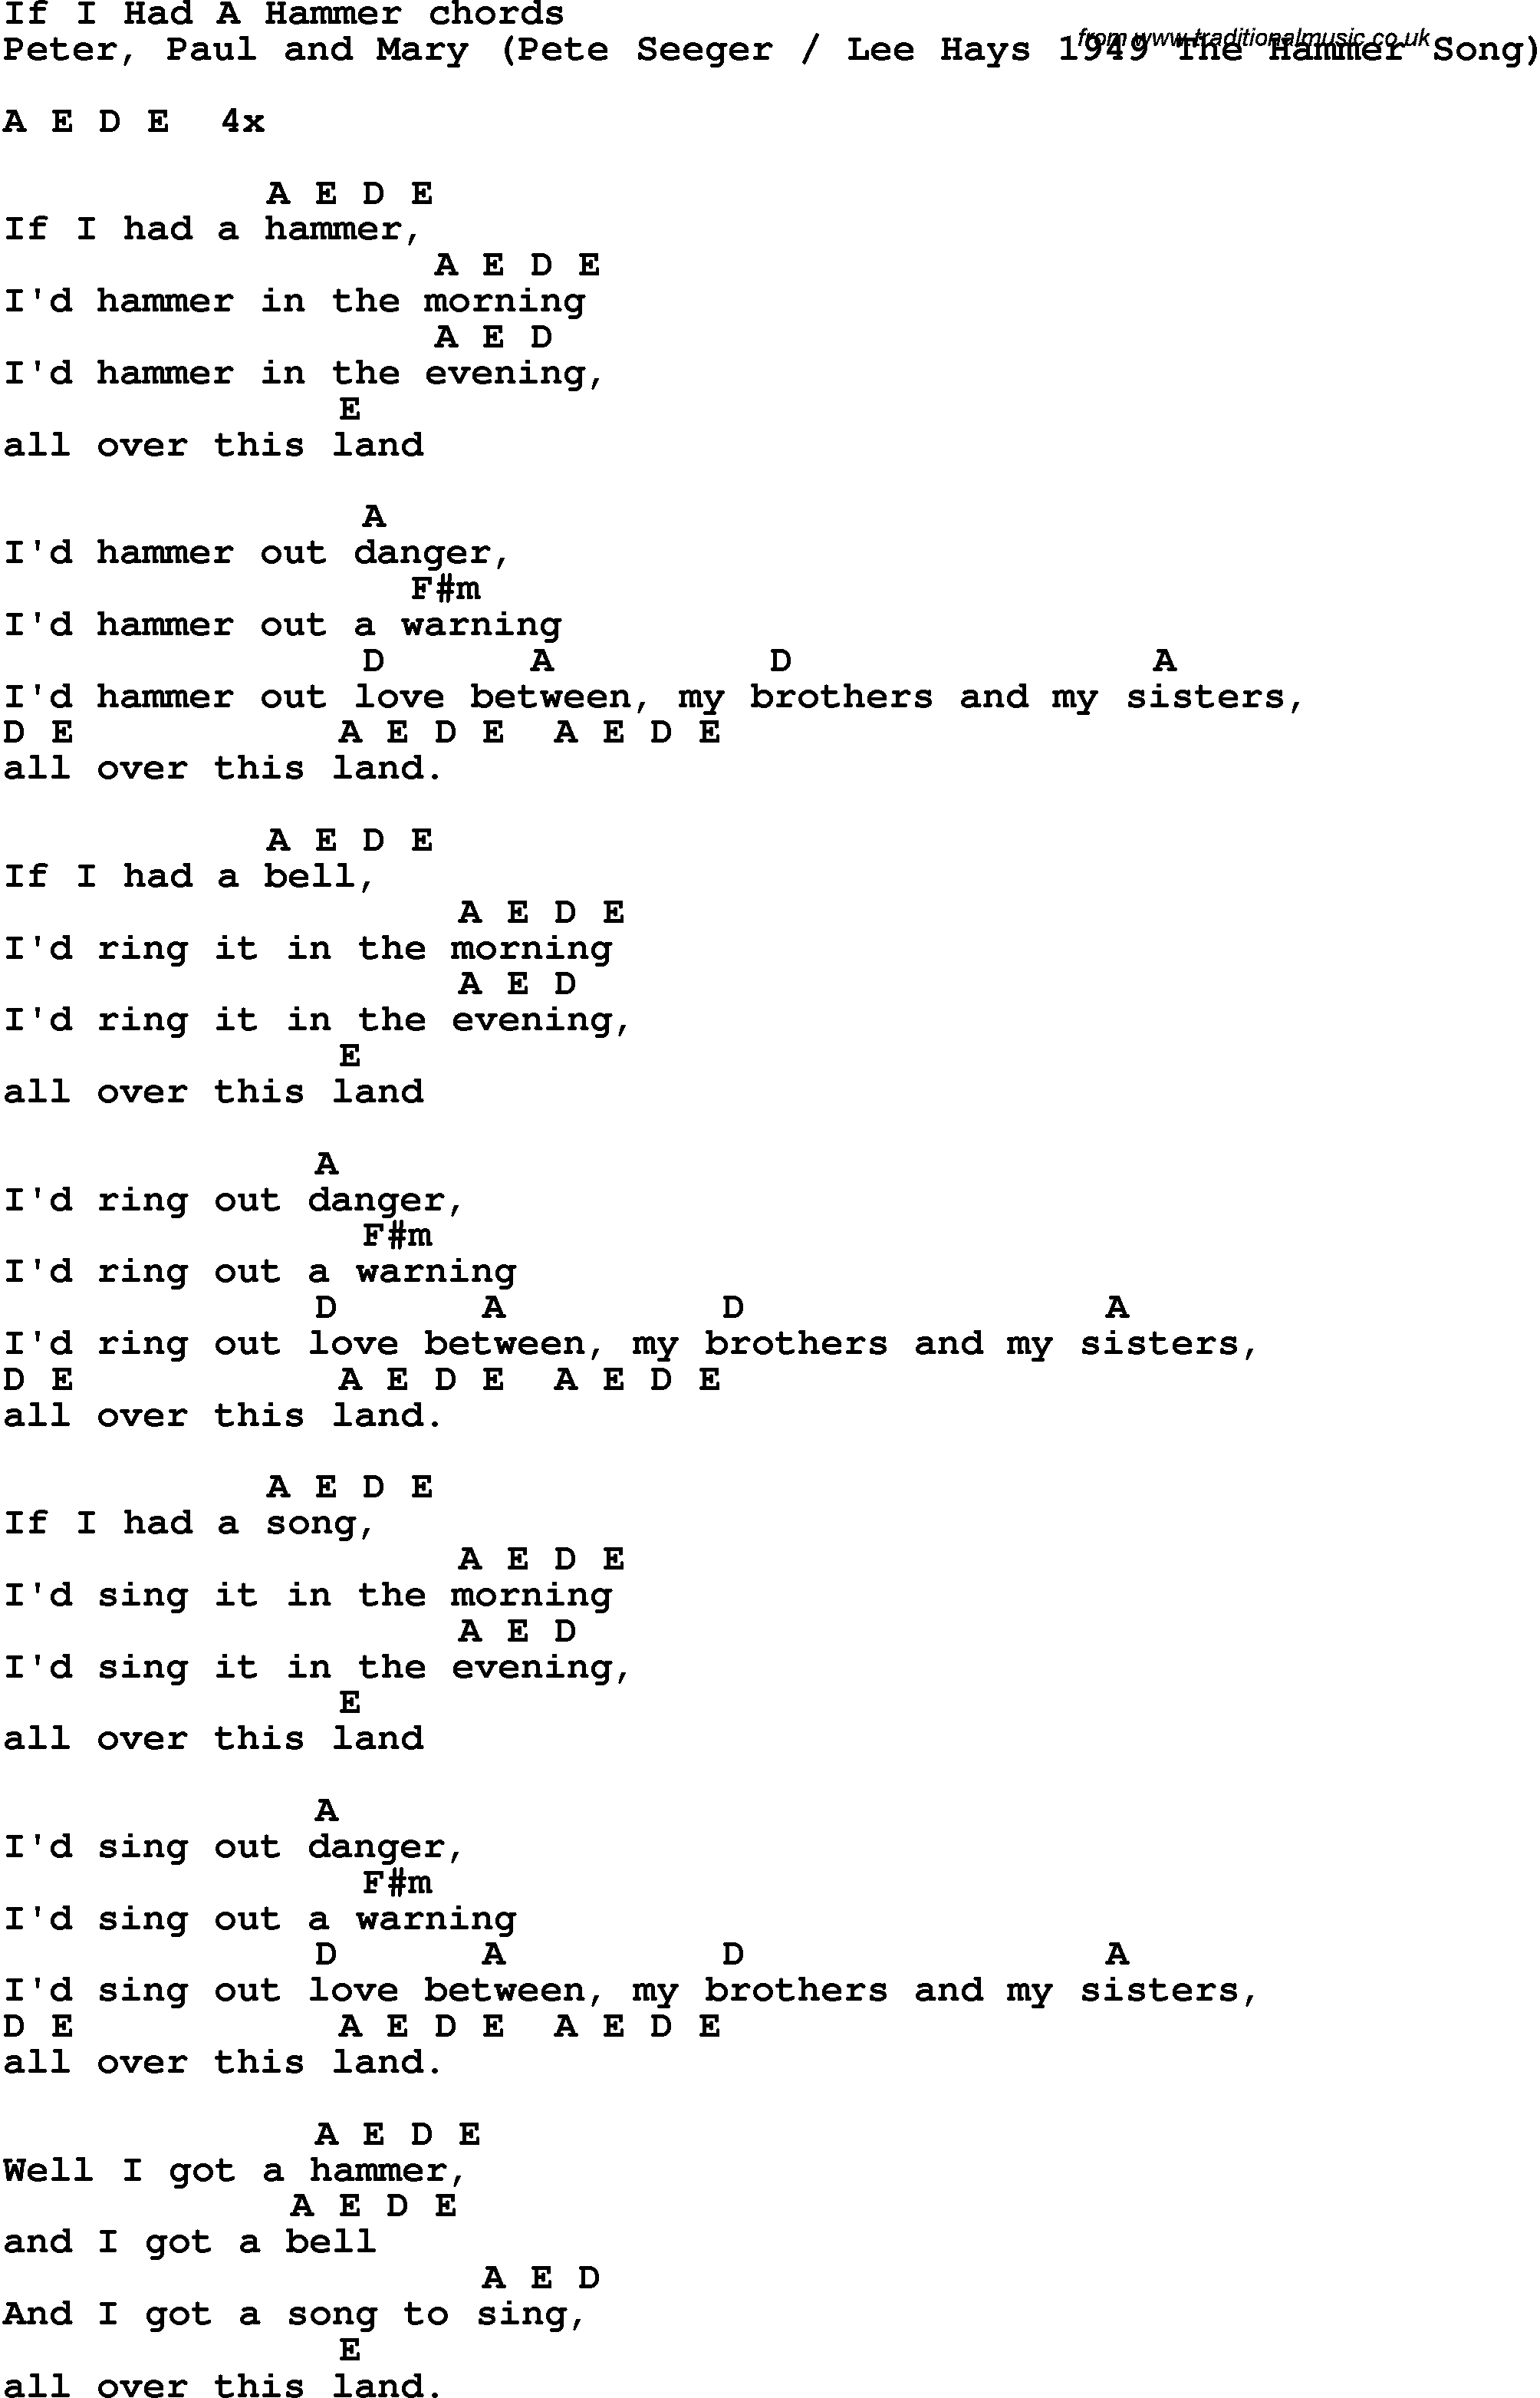 Song Lyrics with guitar chords for If I Had A Hammer